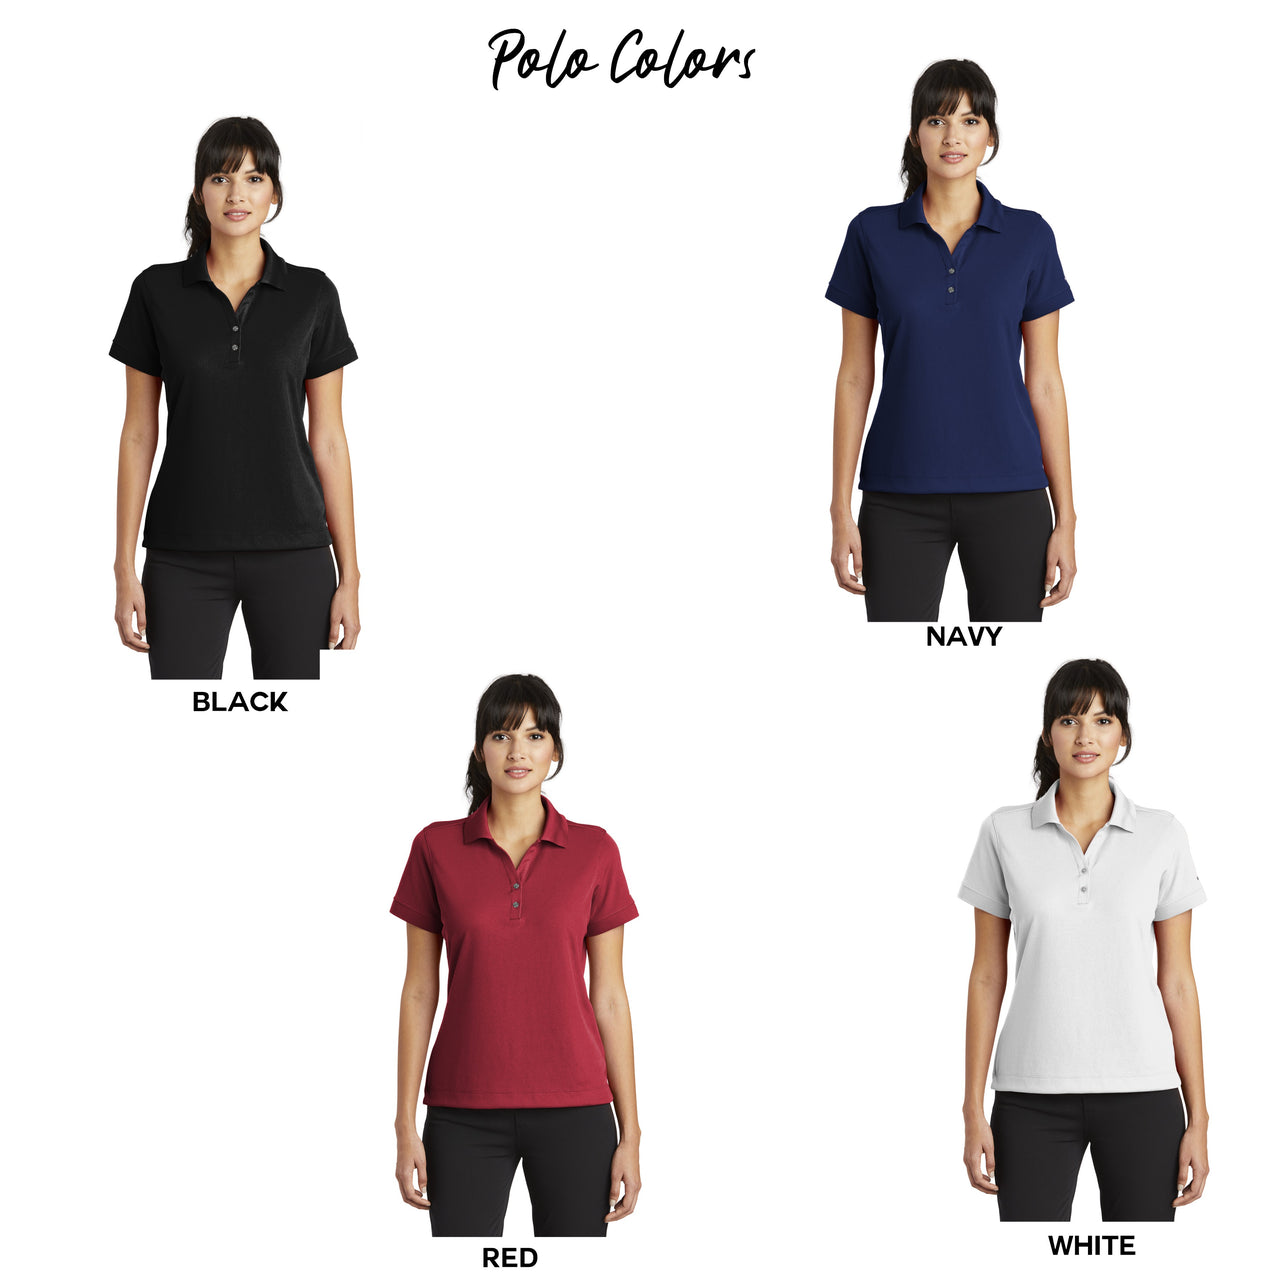 Ladies - Nike Dri-Fit Classic Fit Polo - (Ankeny Real Estate Group)